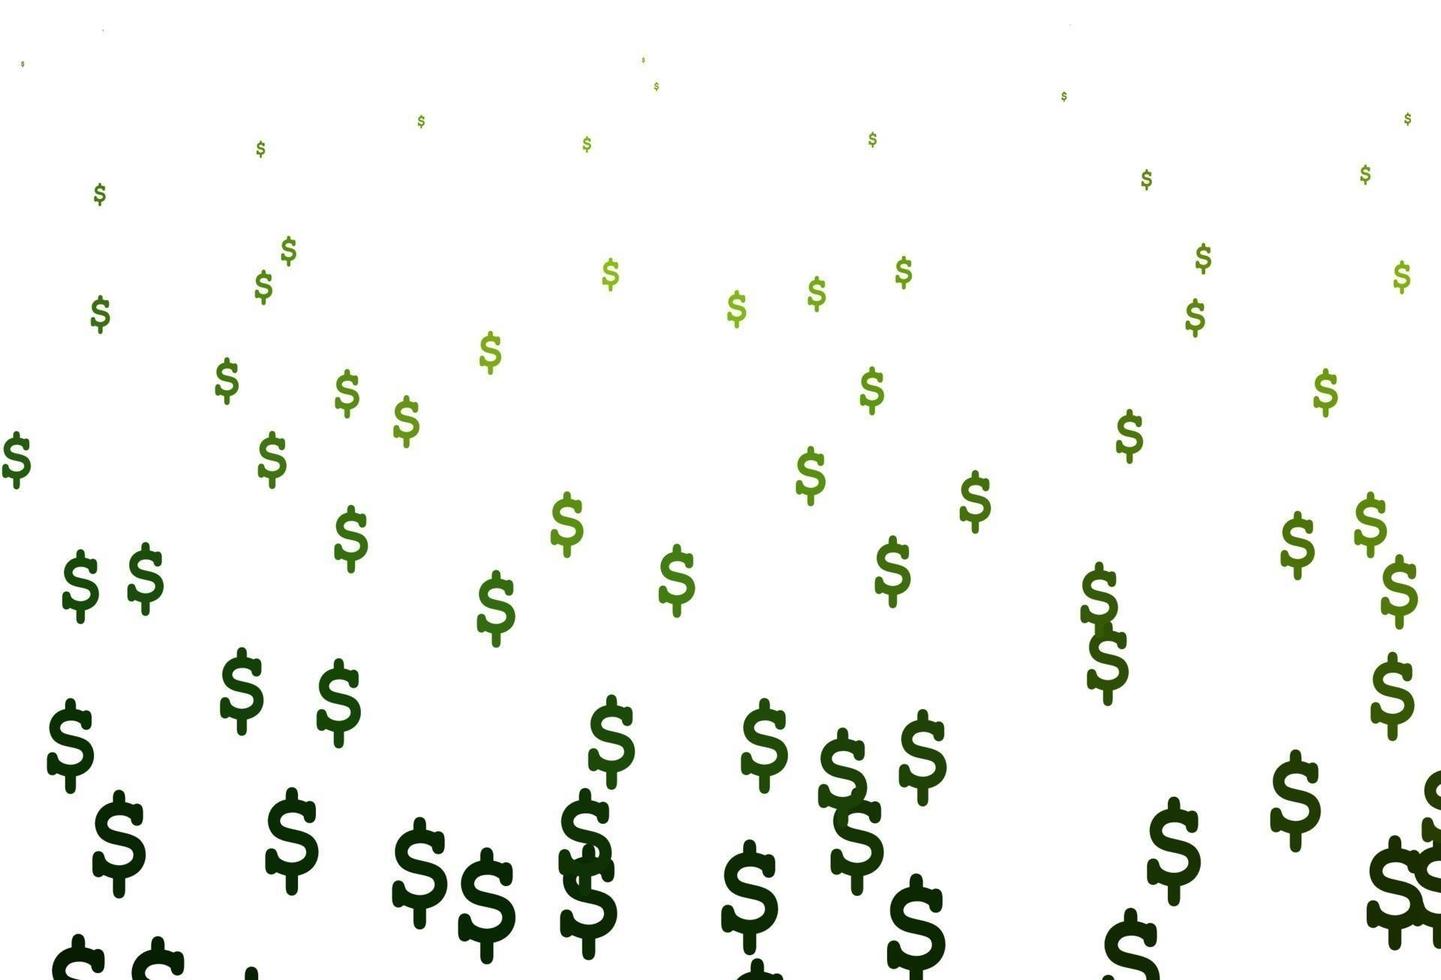 Light Green vector cover with Dollar signs.